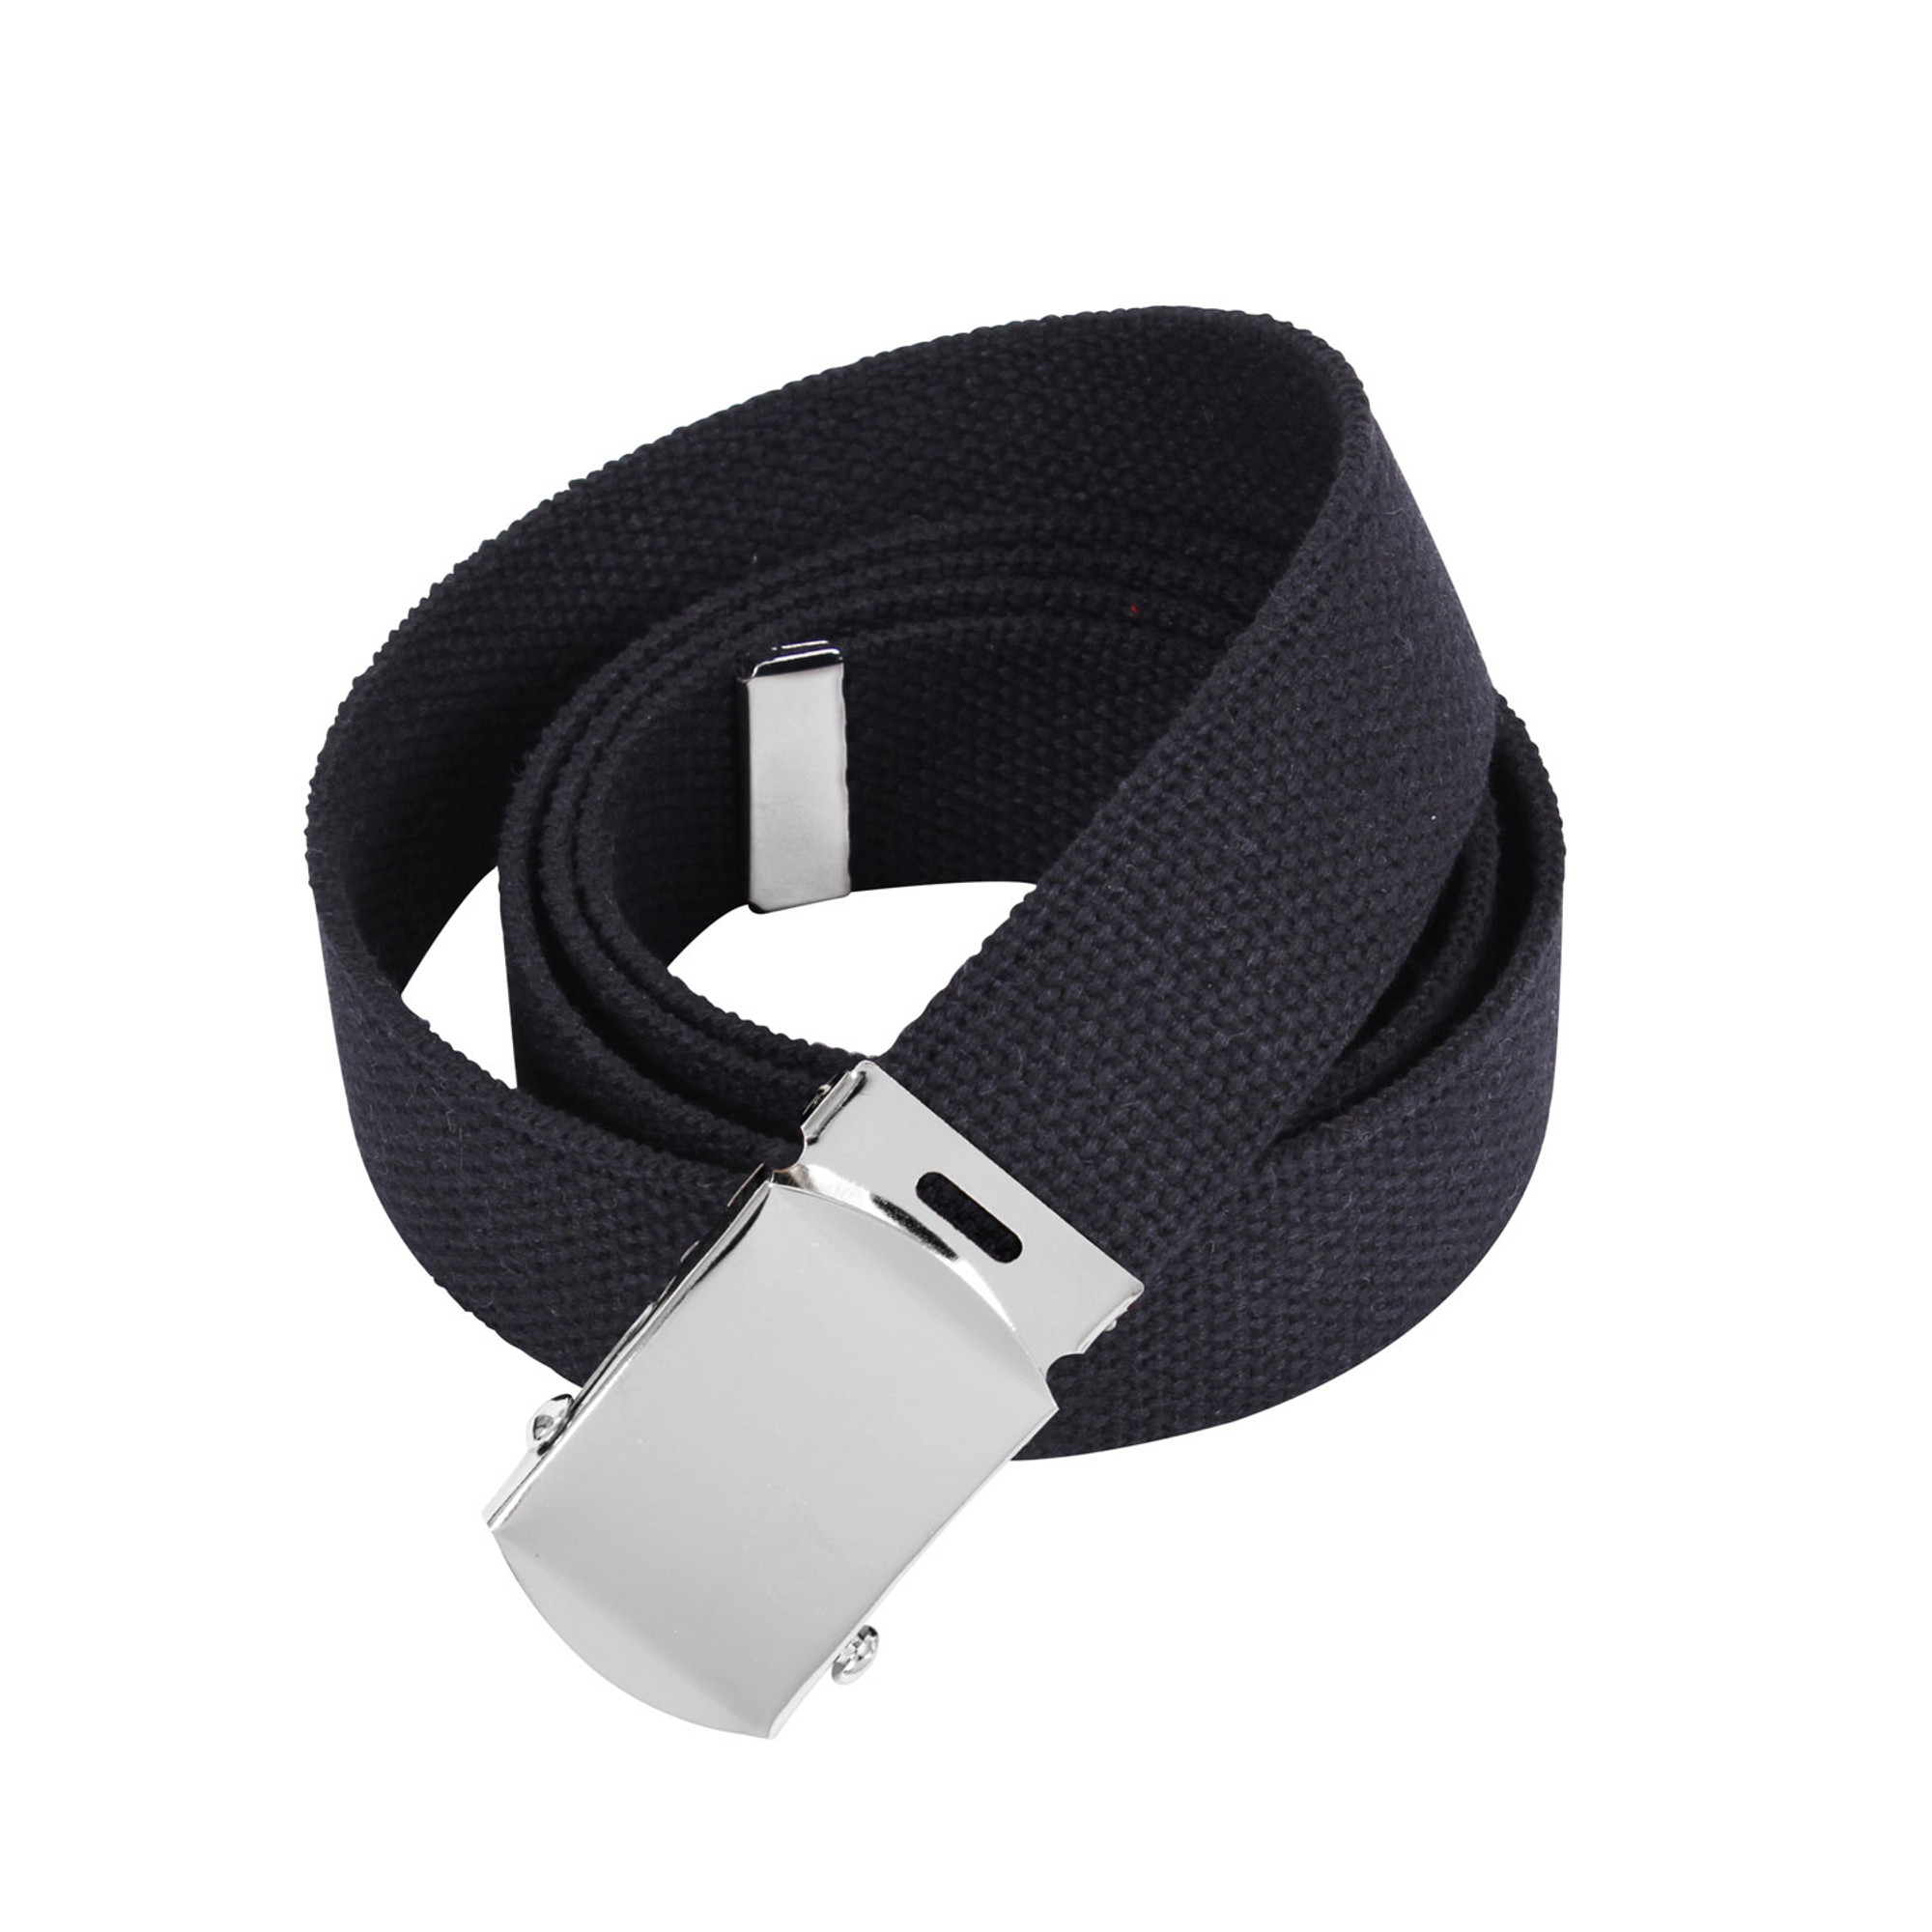 Rothco Military Web Belts - 44 Inches Long - Black/Chrome